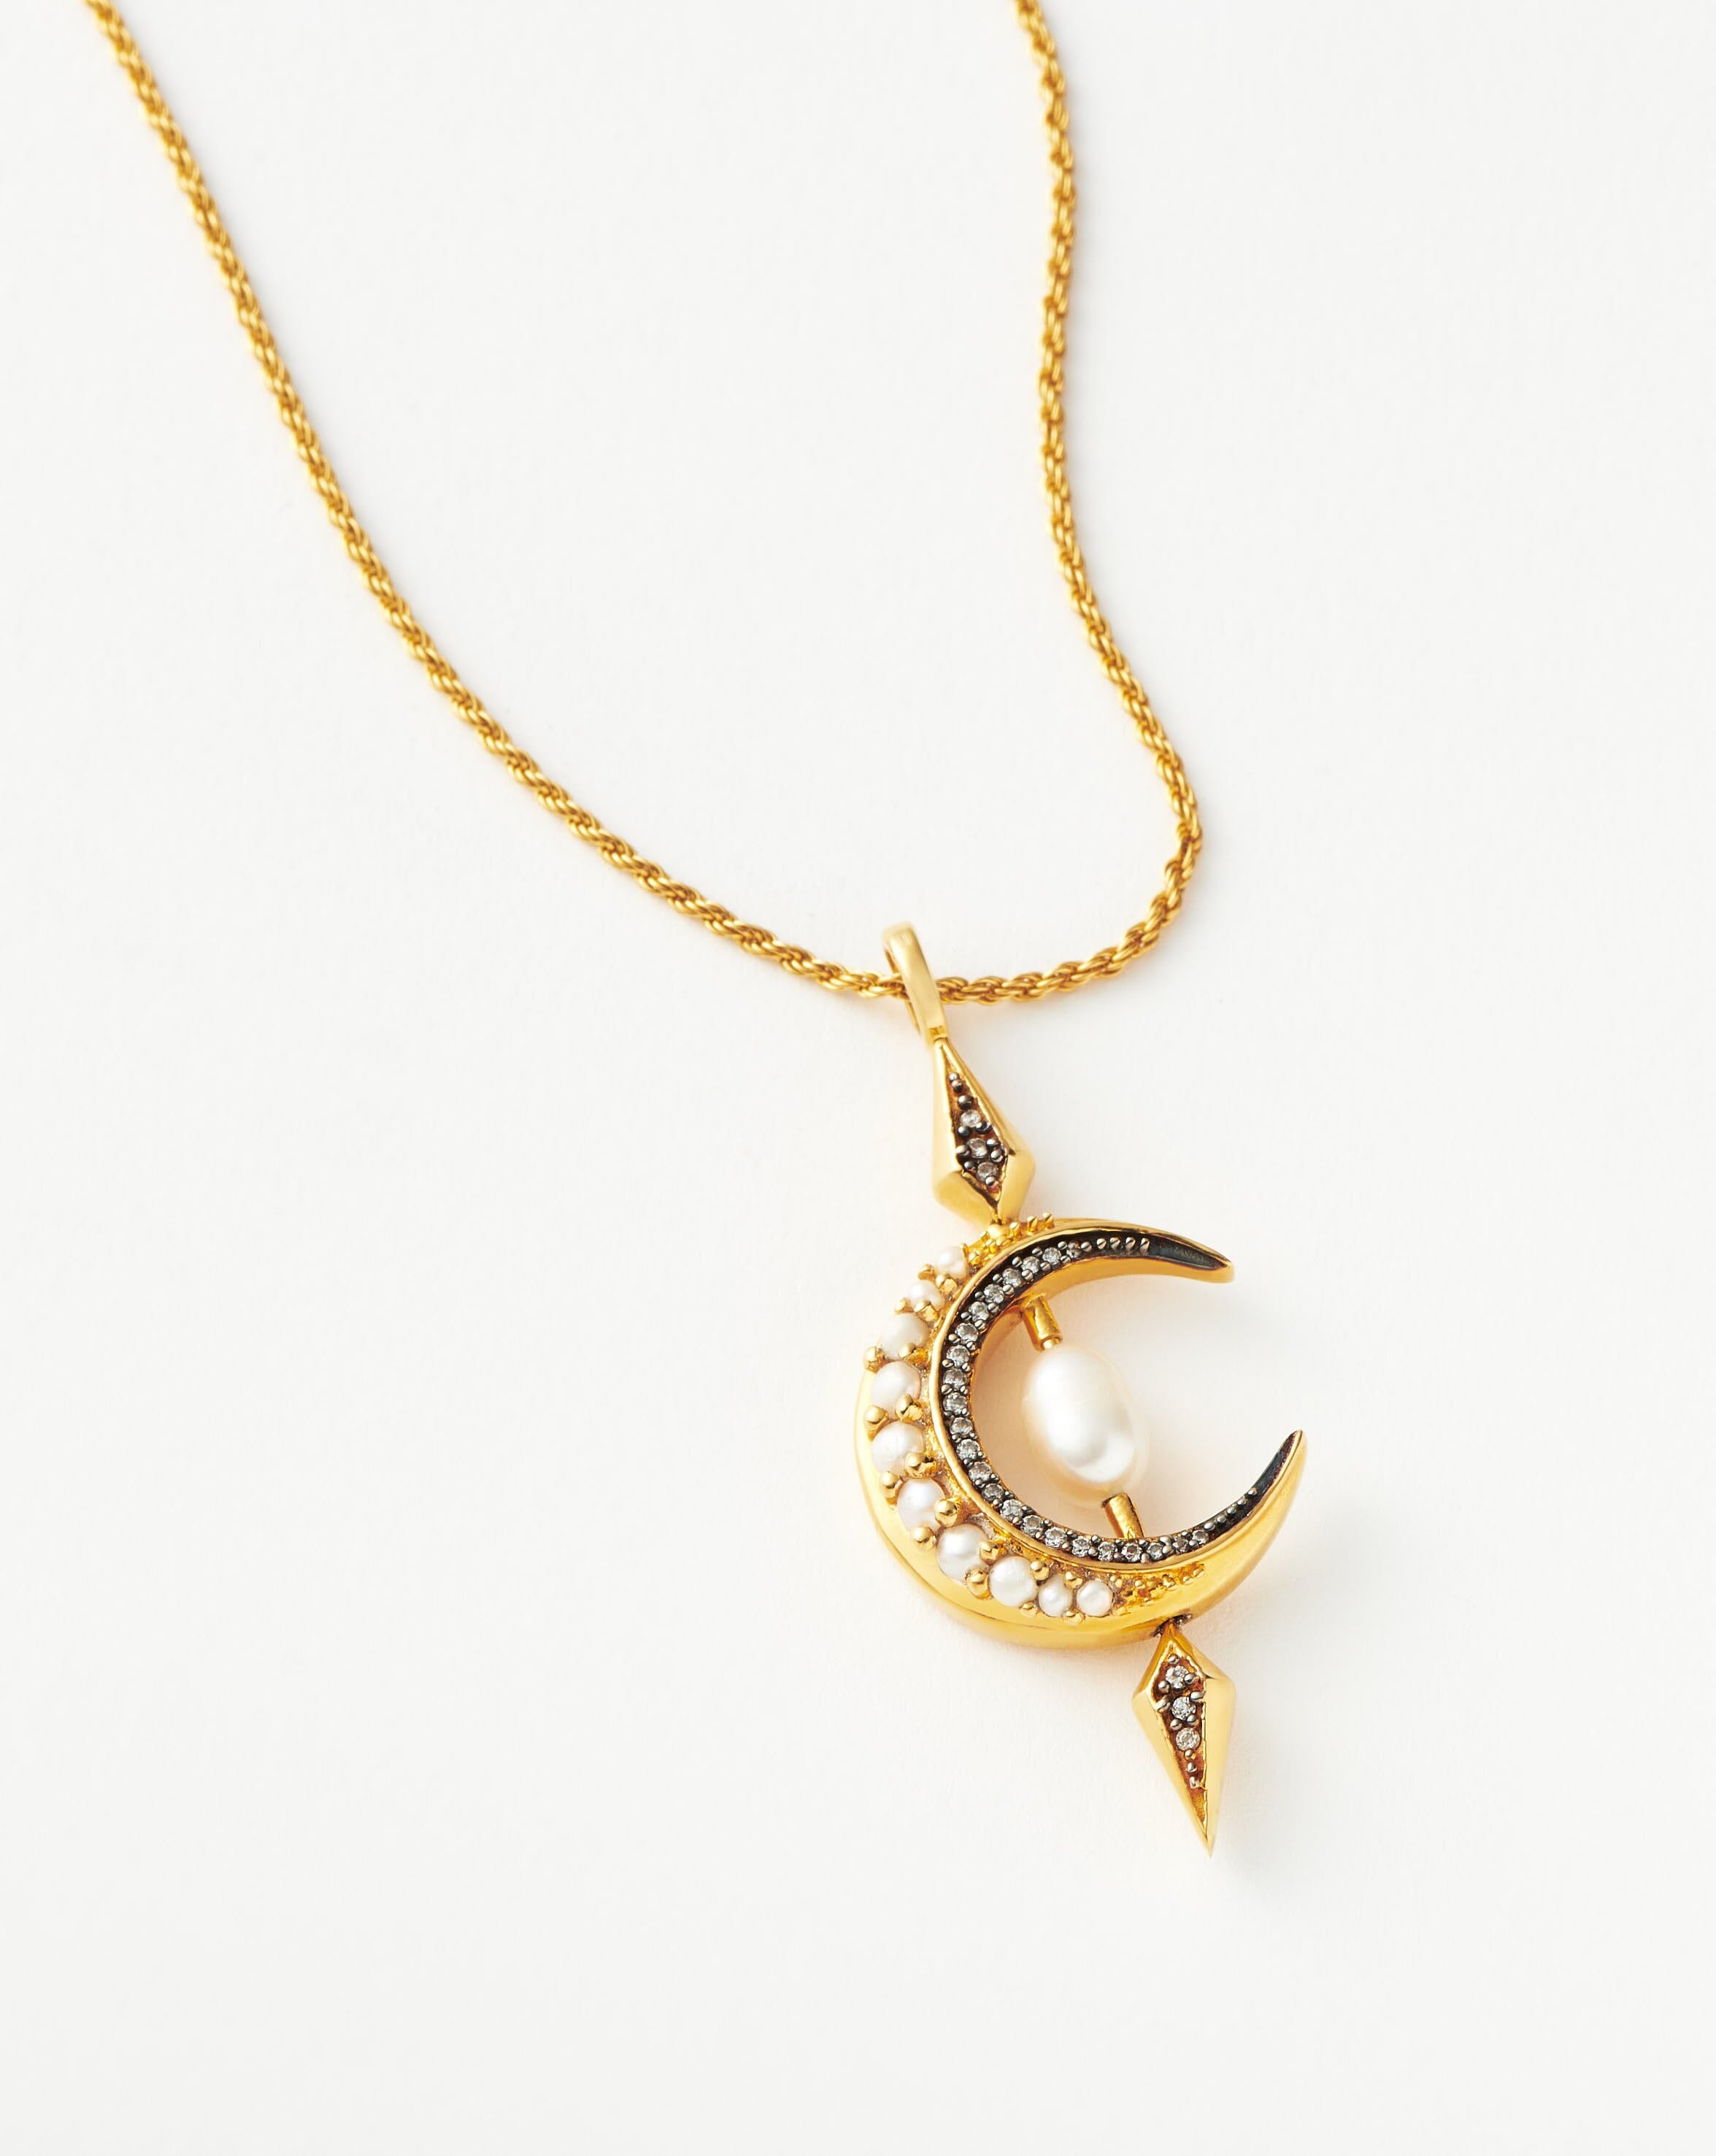 Buy Silver Moon & Star Necklace Online - Accessorize India